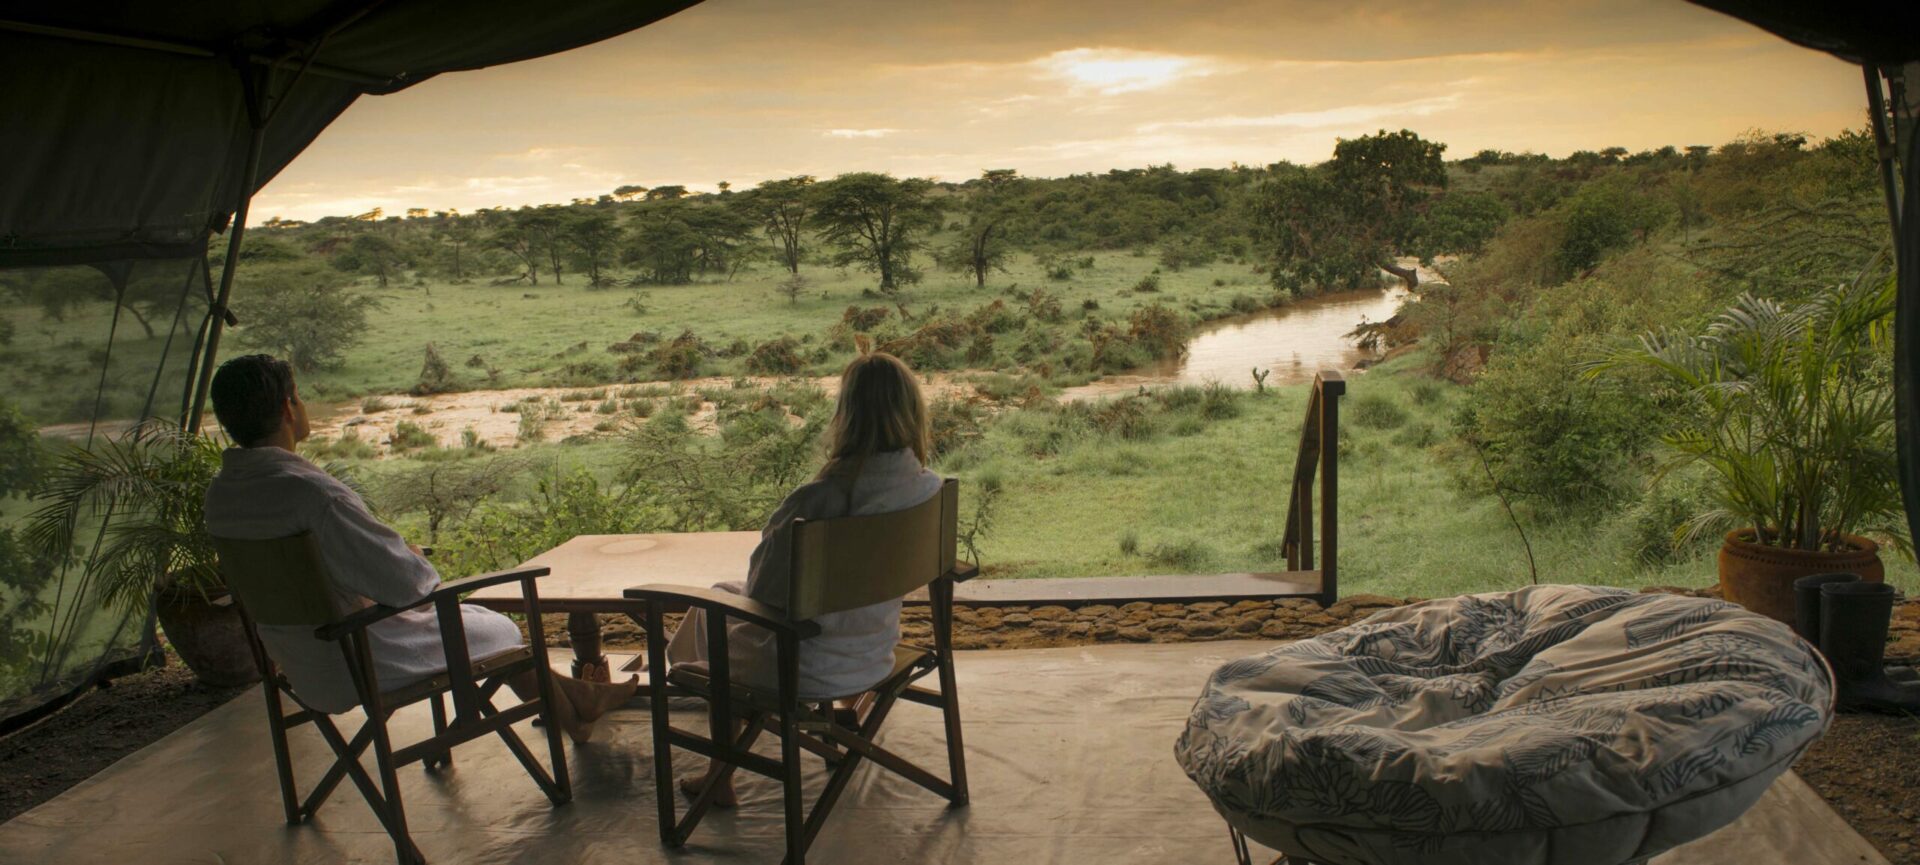 Protecting Kenya: A Luxury Conservation Safari. View from the honeymoon suite at Richard's RIver Camp at sundown on a luxury kenya safari